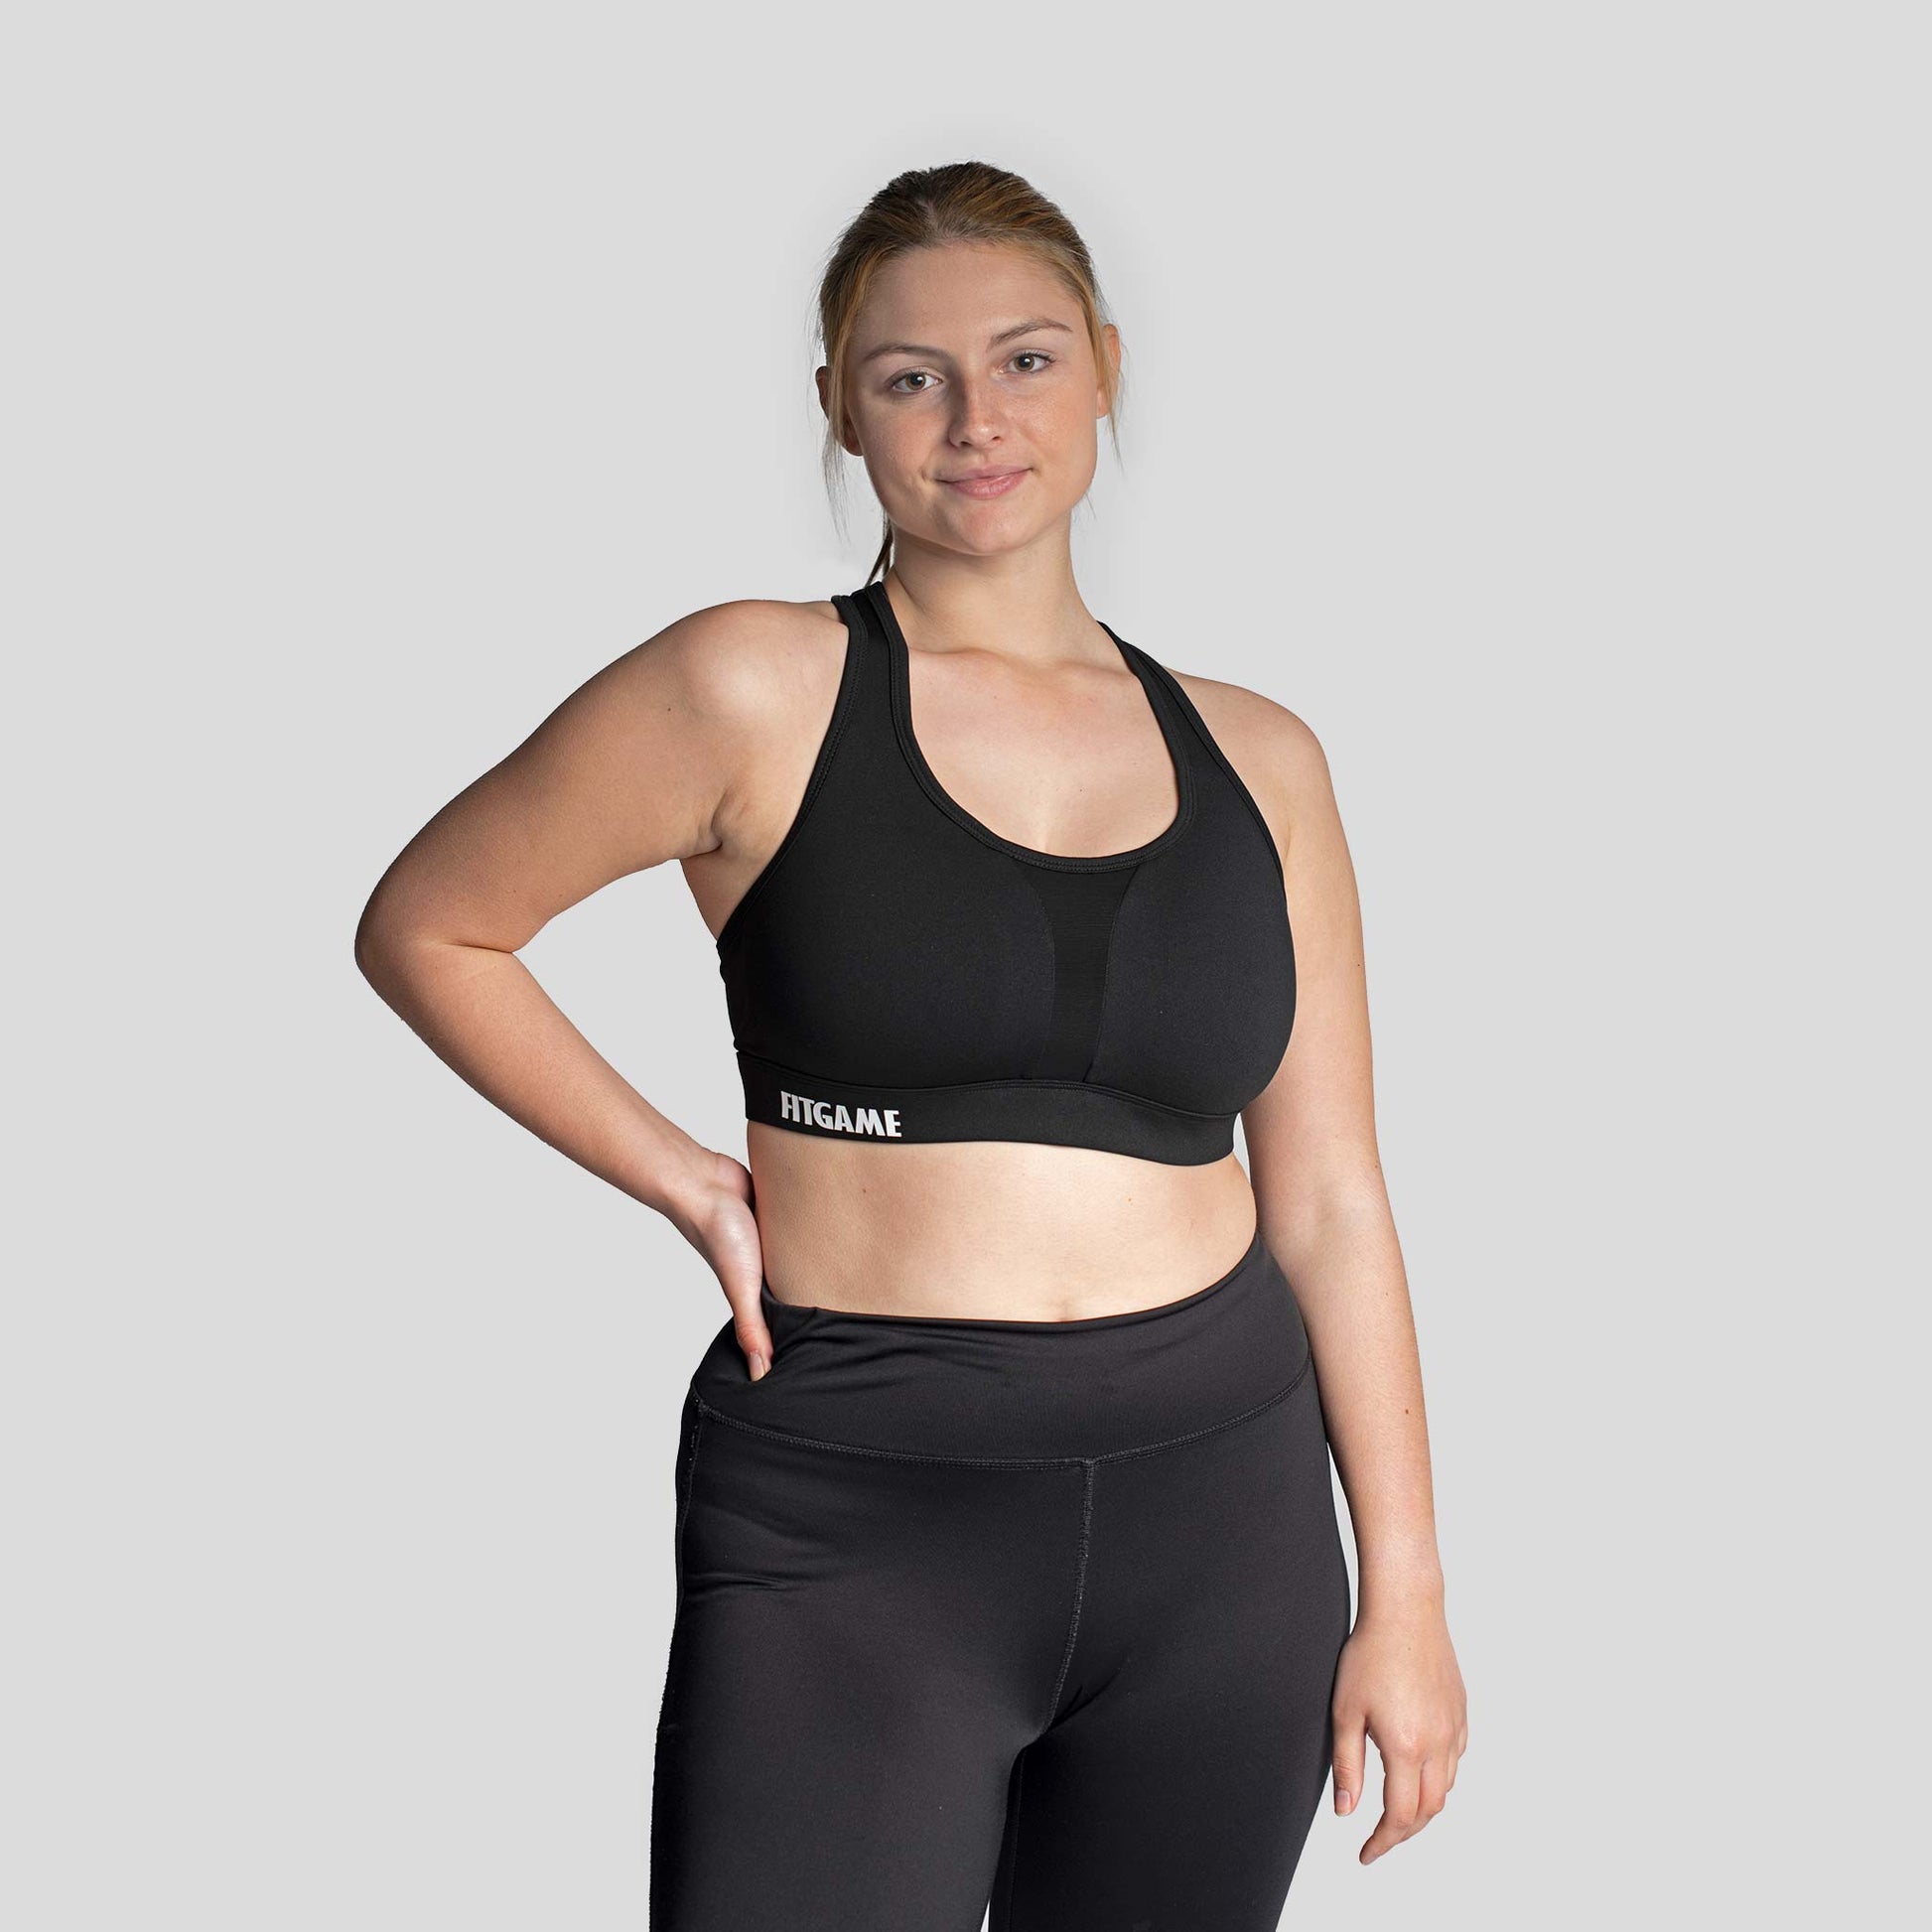 High support sports bra for fuller bust women in classic black